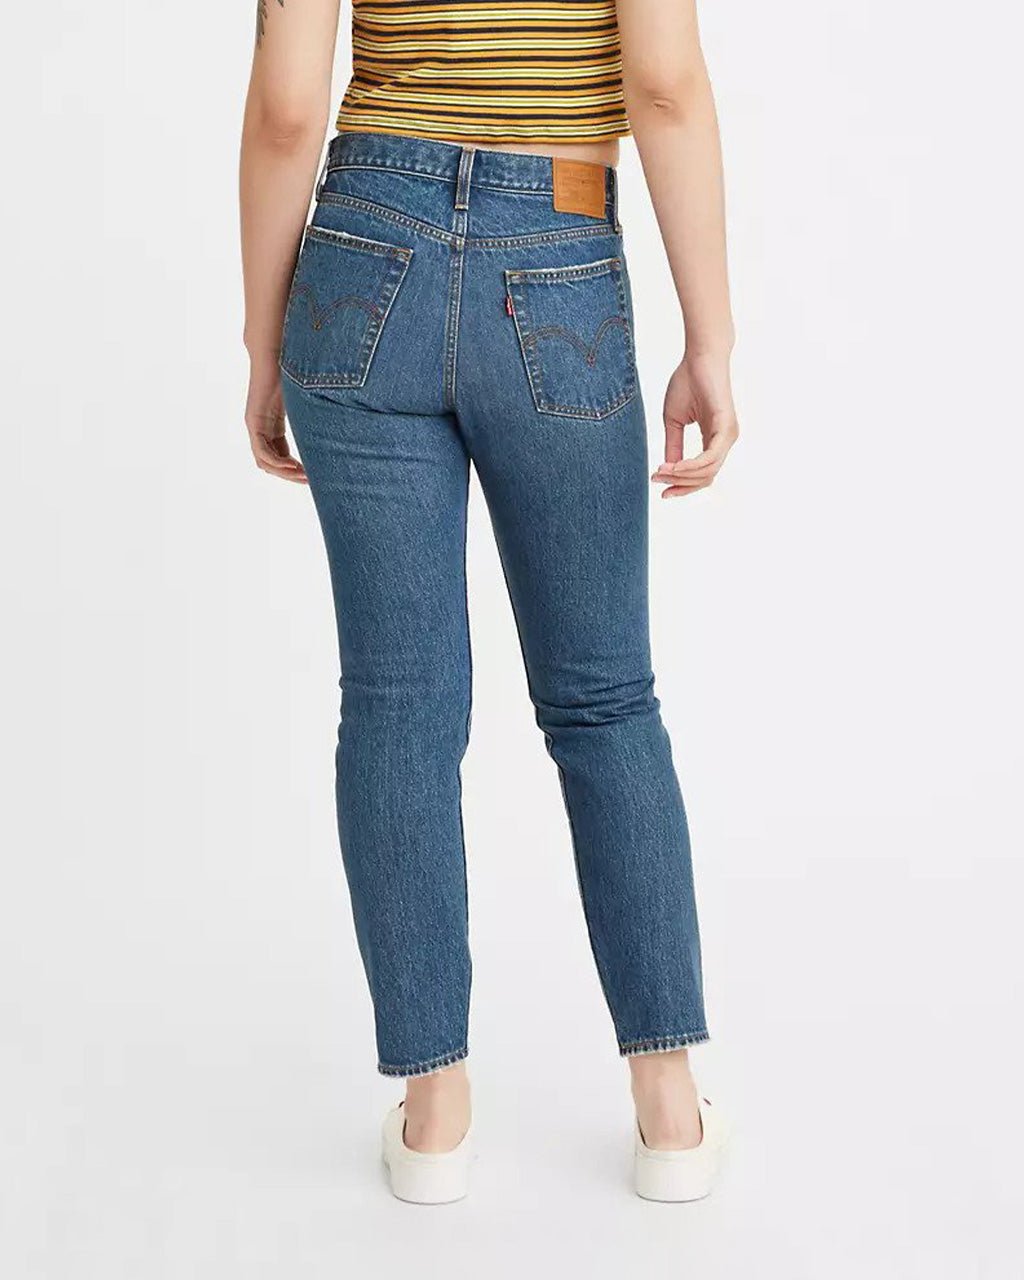 Wedgie Icon Fit - Oxnard Edge by Levi's - jeans 